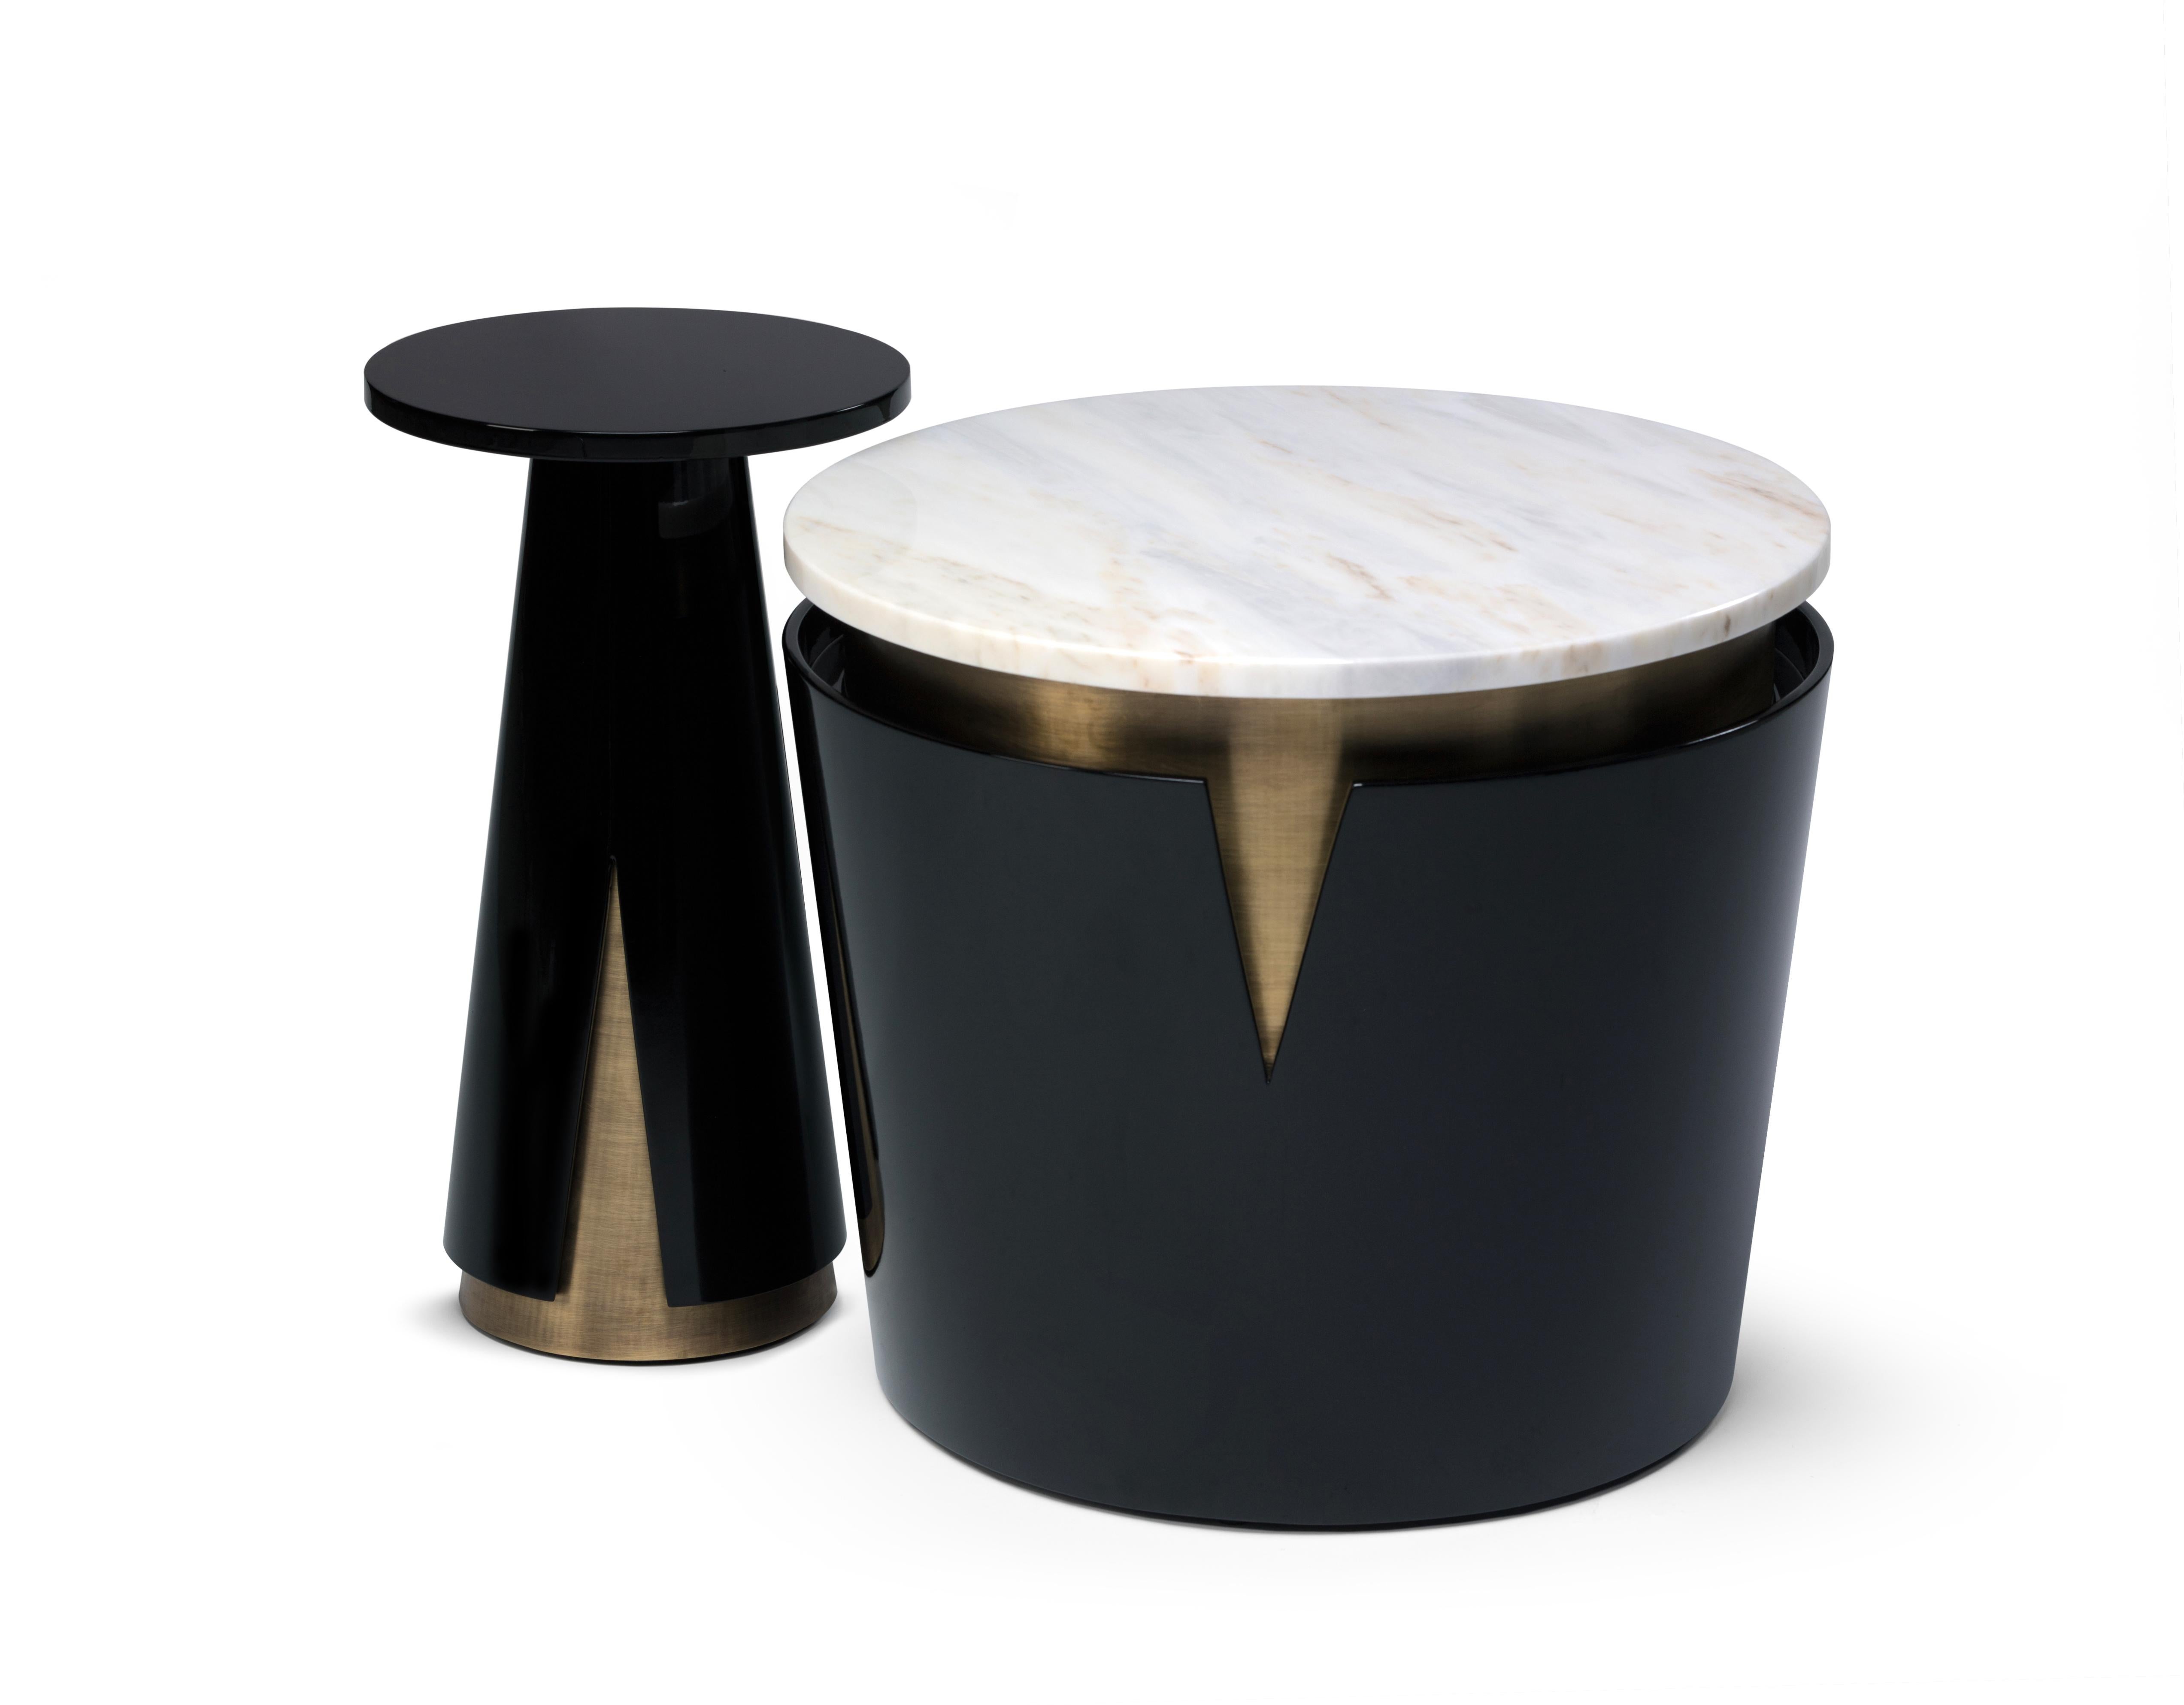 Mini Moon Side Table, Black Lacquer and Light Bronze Details by Duistt

Mini Moon side table makes a perfect match with our Moon side table. With an elongated silhouette it pursues the essence of its primary design inspired by the architecture of